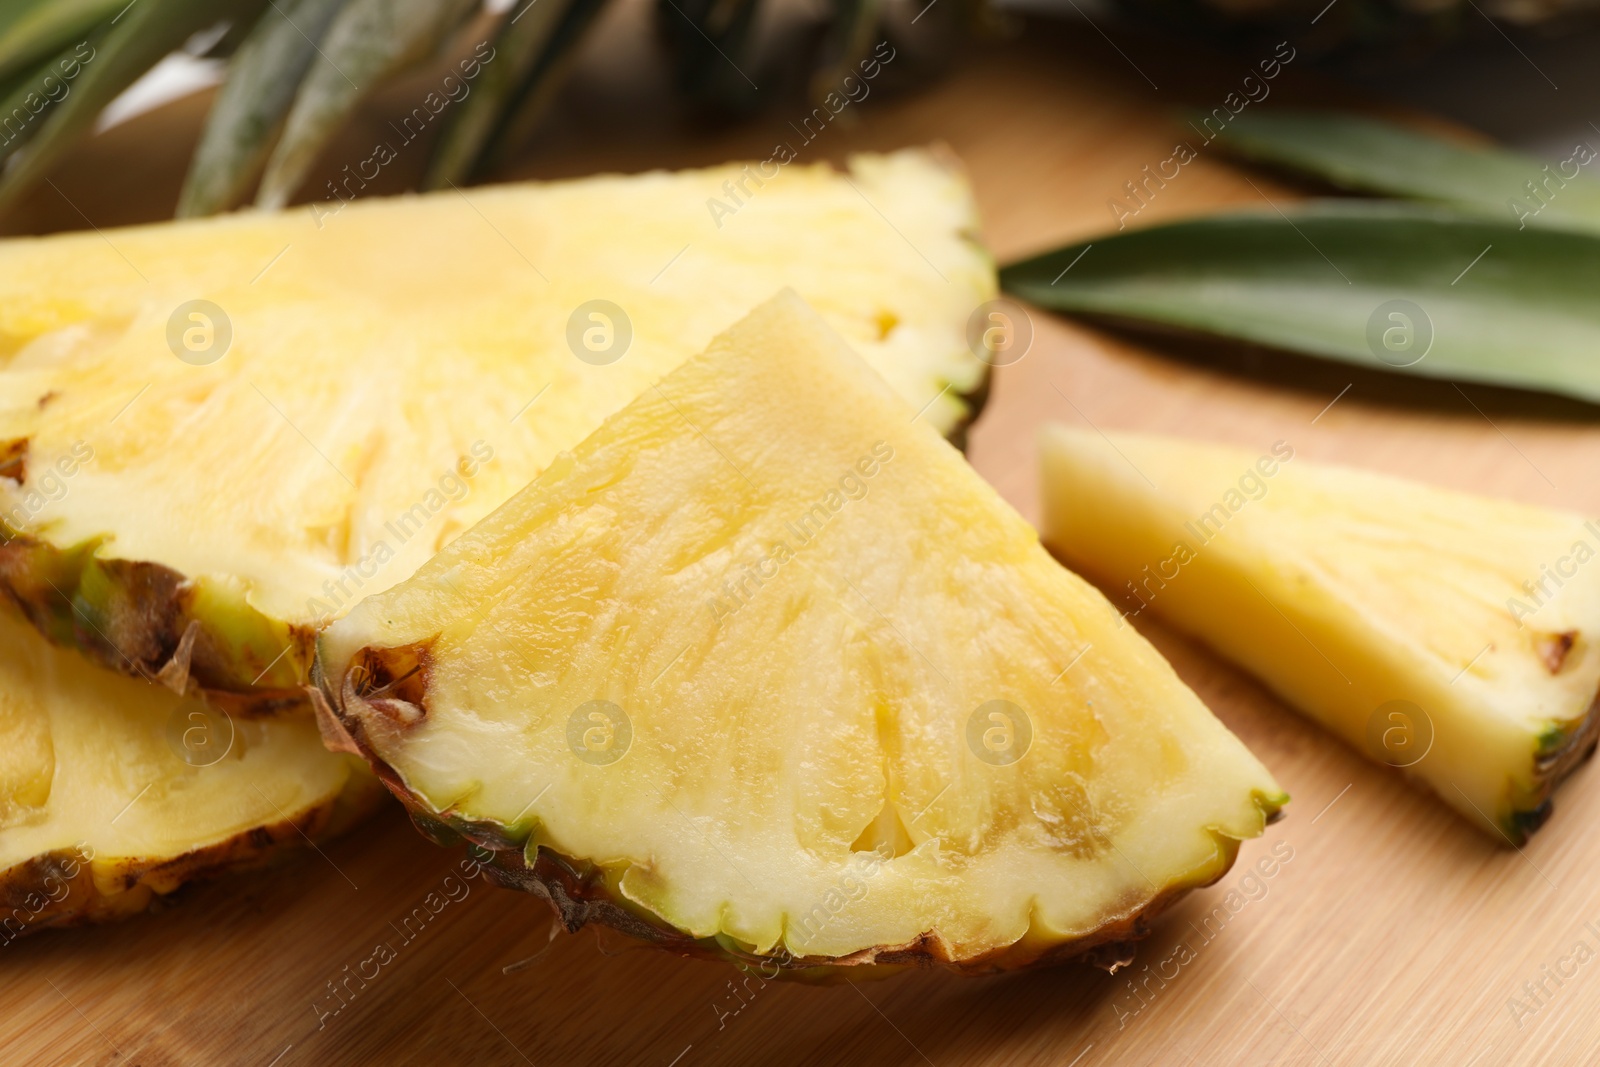 Photo of Slices of ripe juicy pineapple on wooden board, closeup